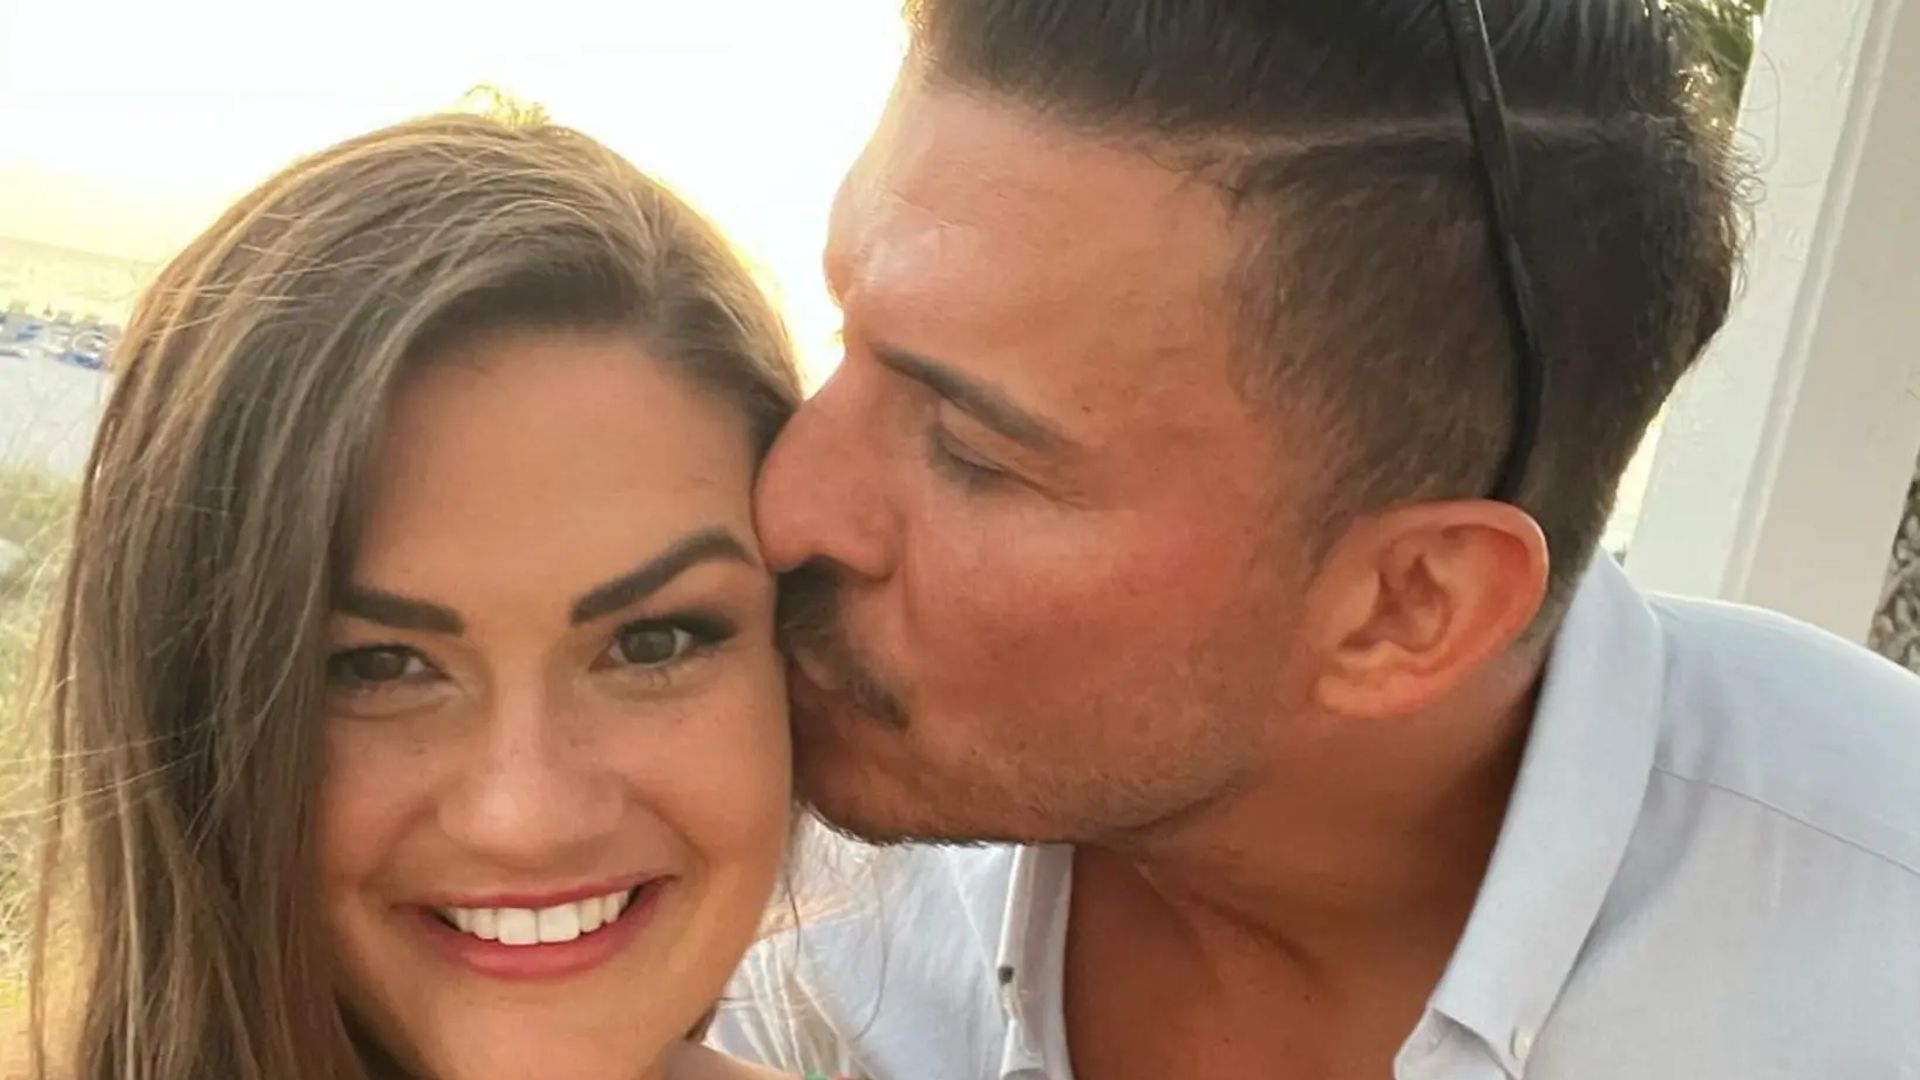 Jax Taylor reveals he's 'working' to get ex Brittany Cartwright back following split